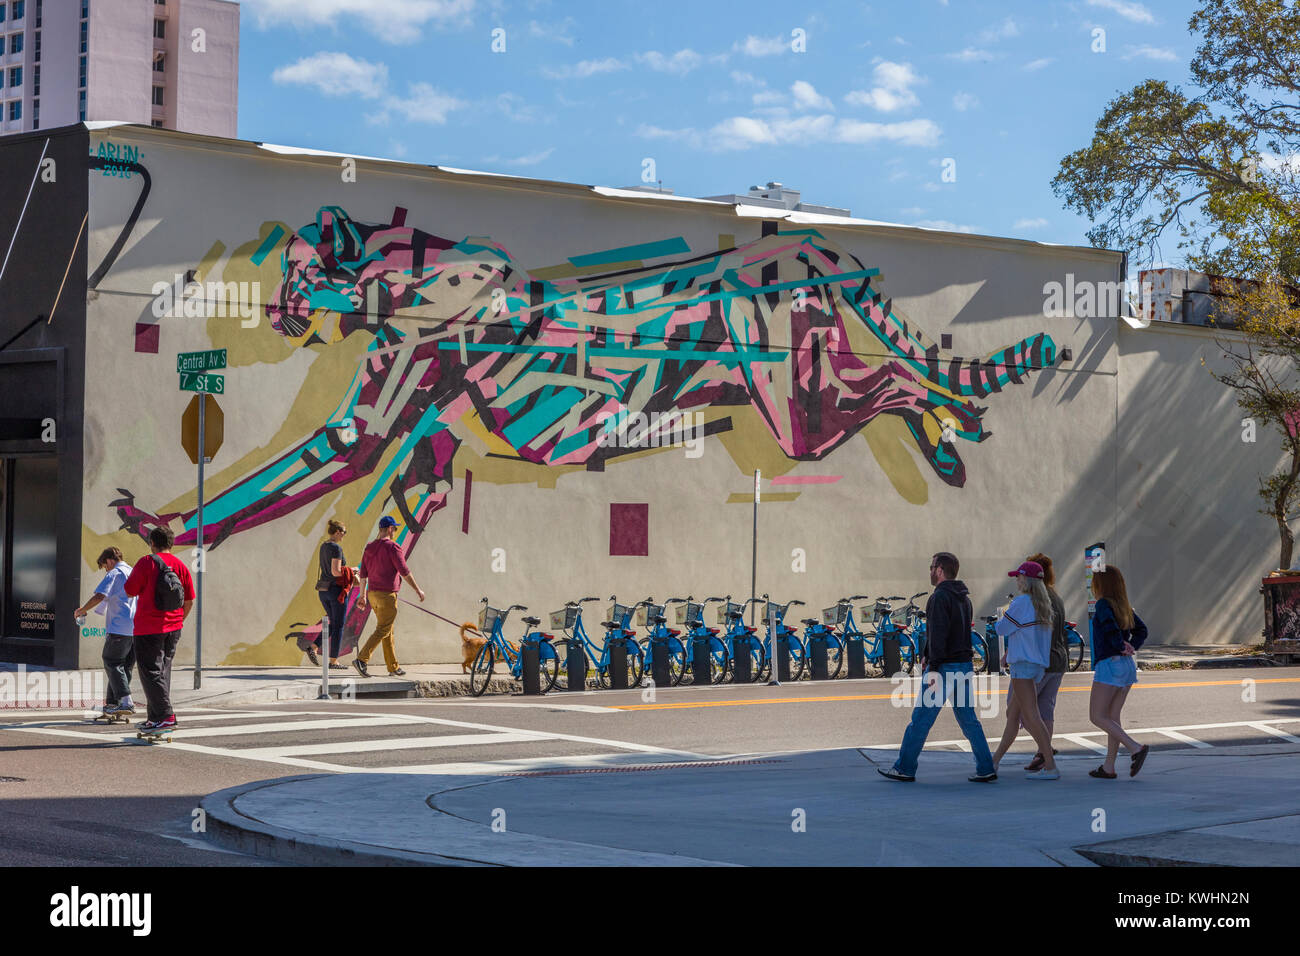 Wall mural in the Central Arts District of St Petersburg Florida, United States Stock Photo